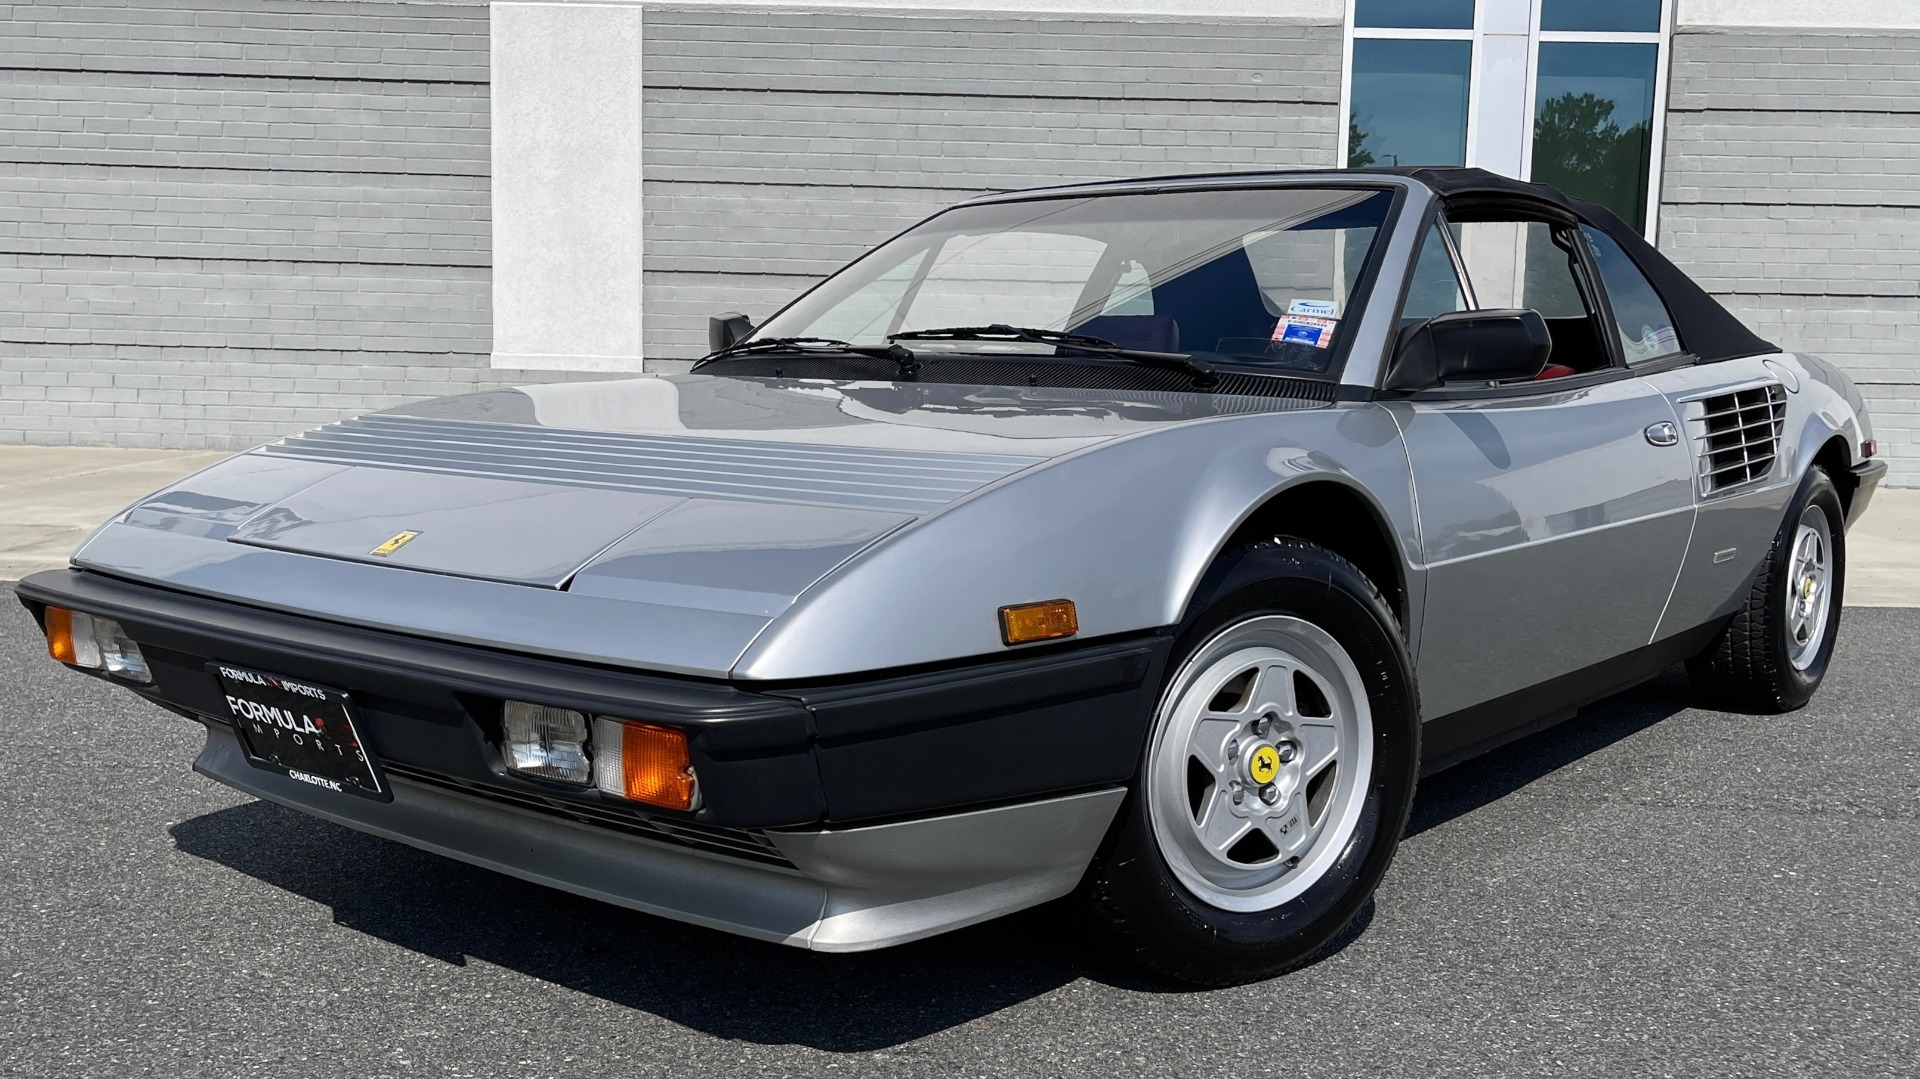 Used 1984 Ferrari MONDIAL 2+2 CABRIOLET / MID-ENGINE 3.0L V8 240HP / 5-SPEED MANUAL / LOW MILES for sale $55,200 at Formula Imports in Charlotte NC 28227 1